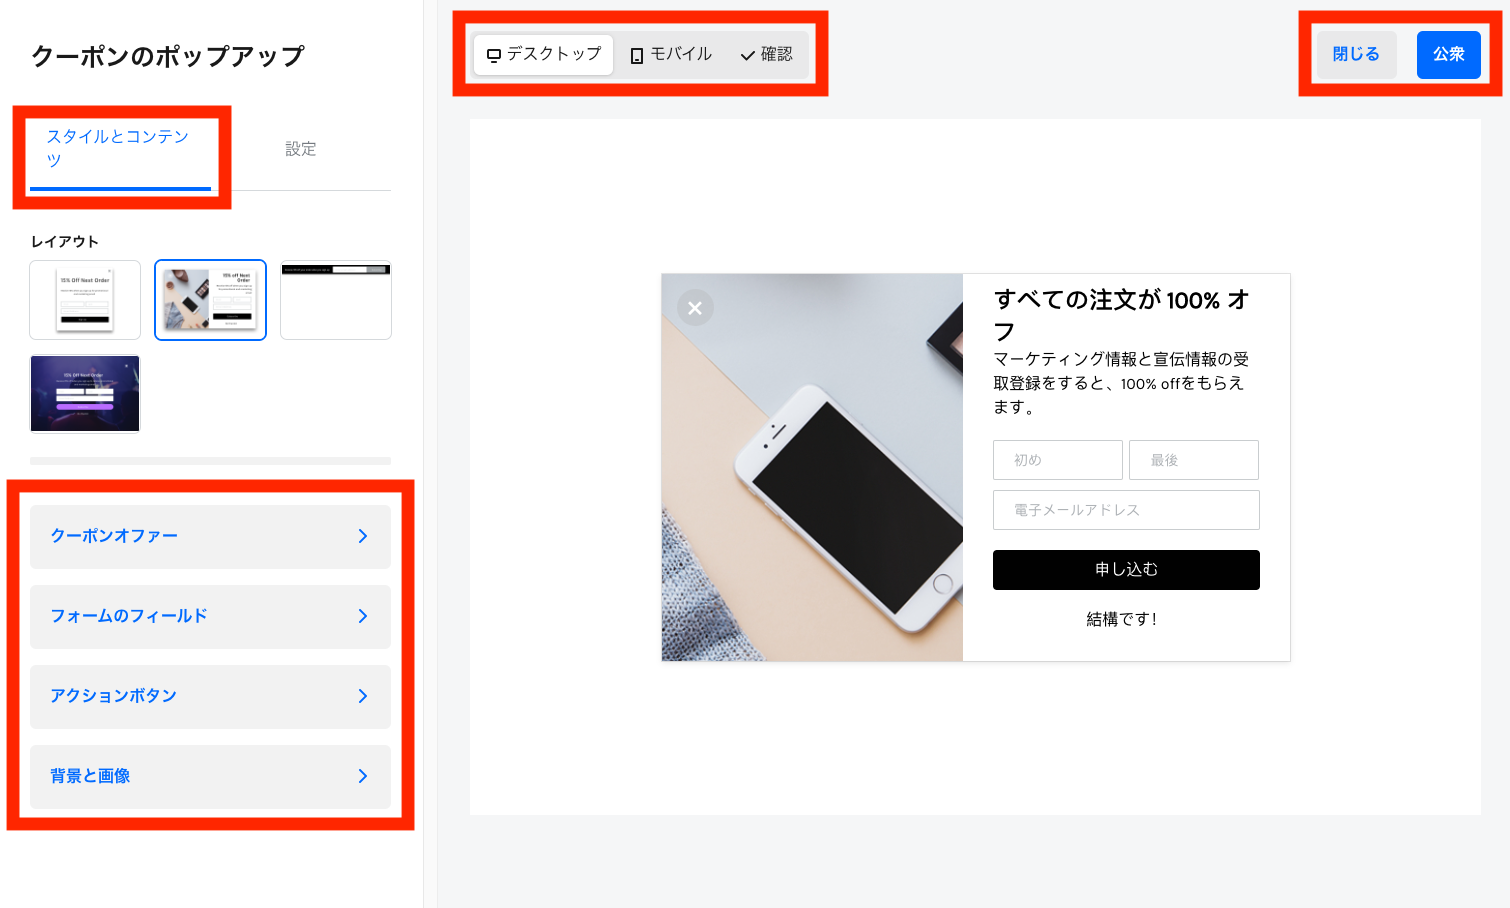 Square-Online-Popup-Style-and-Content-JP